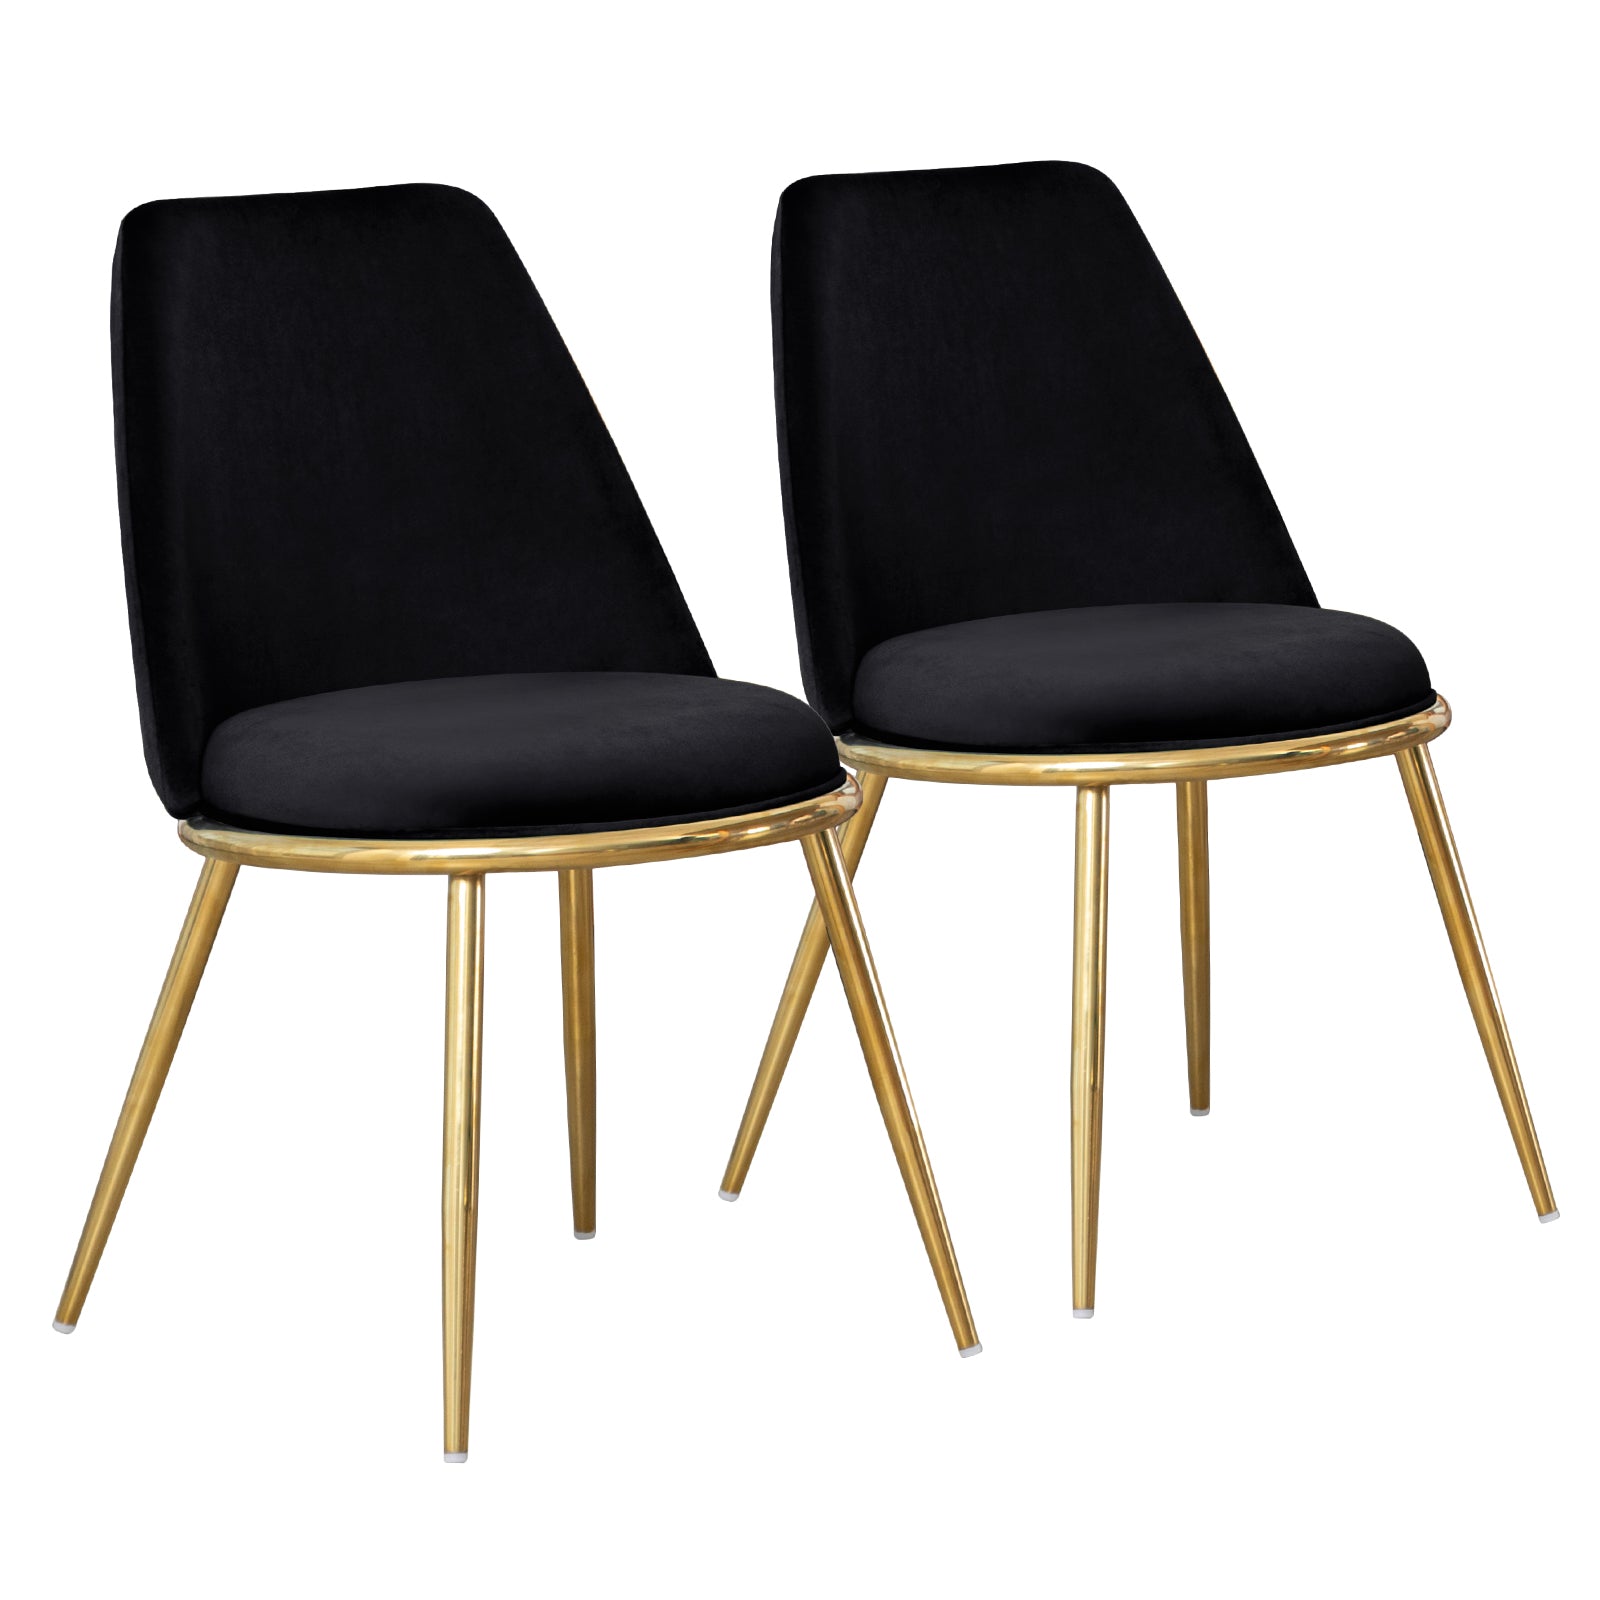 Set of 2 Modern Dining Chairs